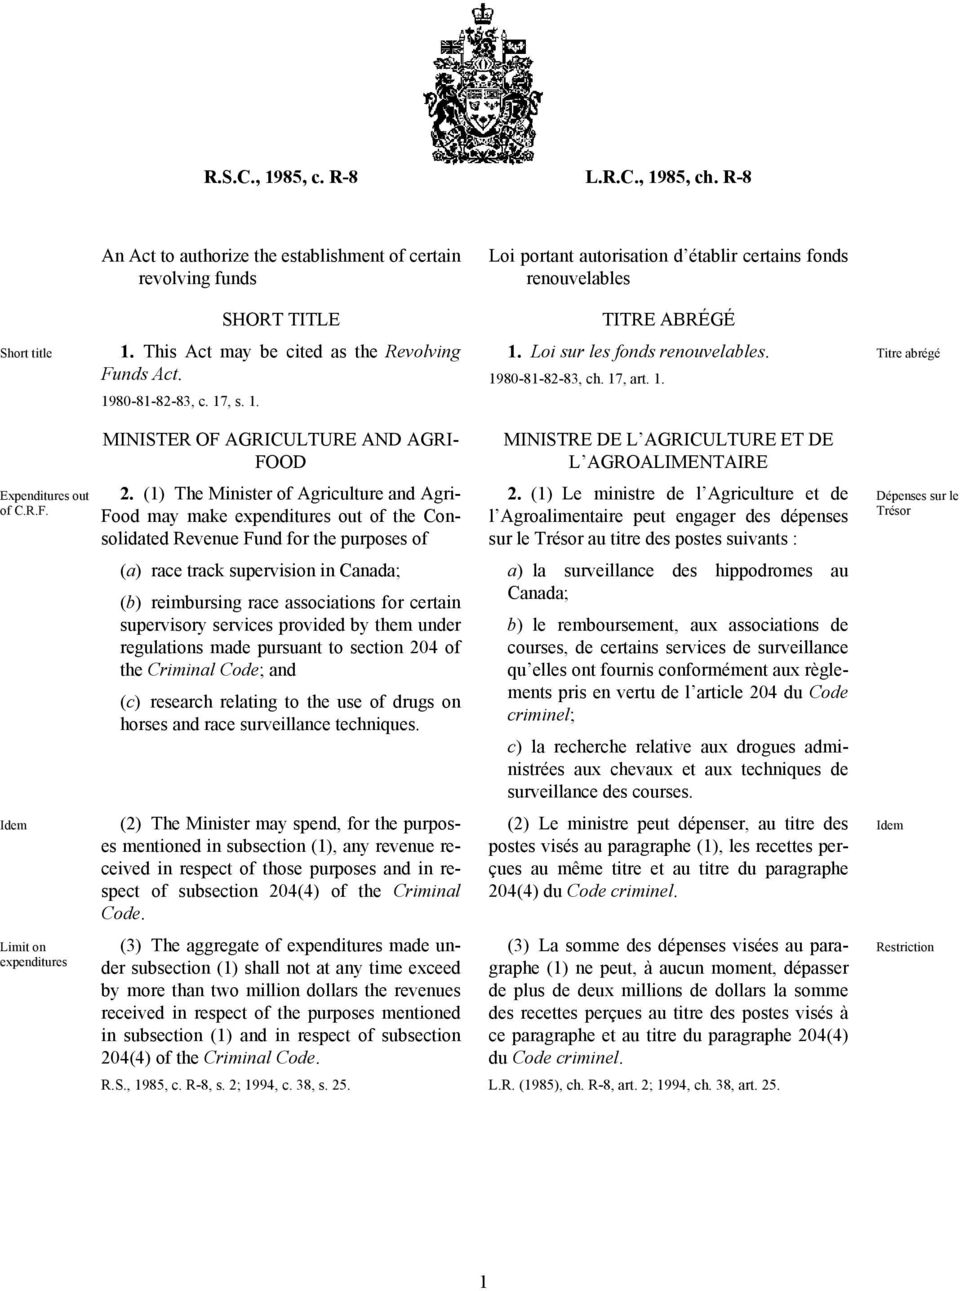 This Act may be cited as the Revolving Funds Act. 1980-81-82-83, c. 17, s. 1. 1. Loi sur les fonds renouvelables. 1980-81-82-83, ch. 17, art. 1. Titre abrégé MINISTER OF AGRICULTURE AND AGRI- FOOD MINISTRE DE L AGRICULTURE ET DE L AGROALIMENTAIRE Expenditures out of C.